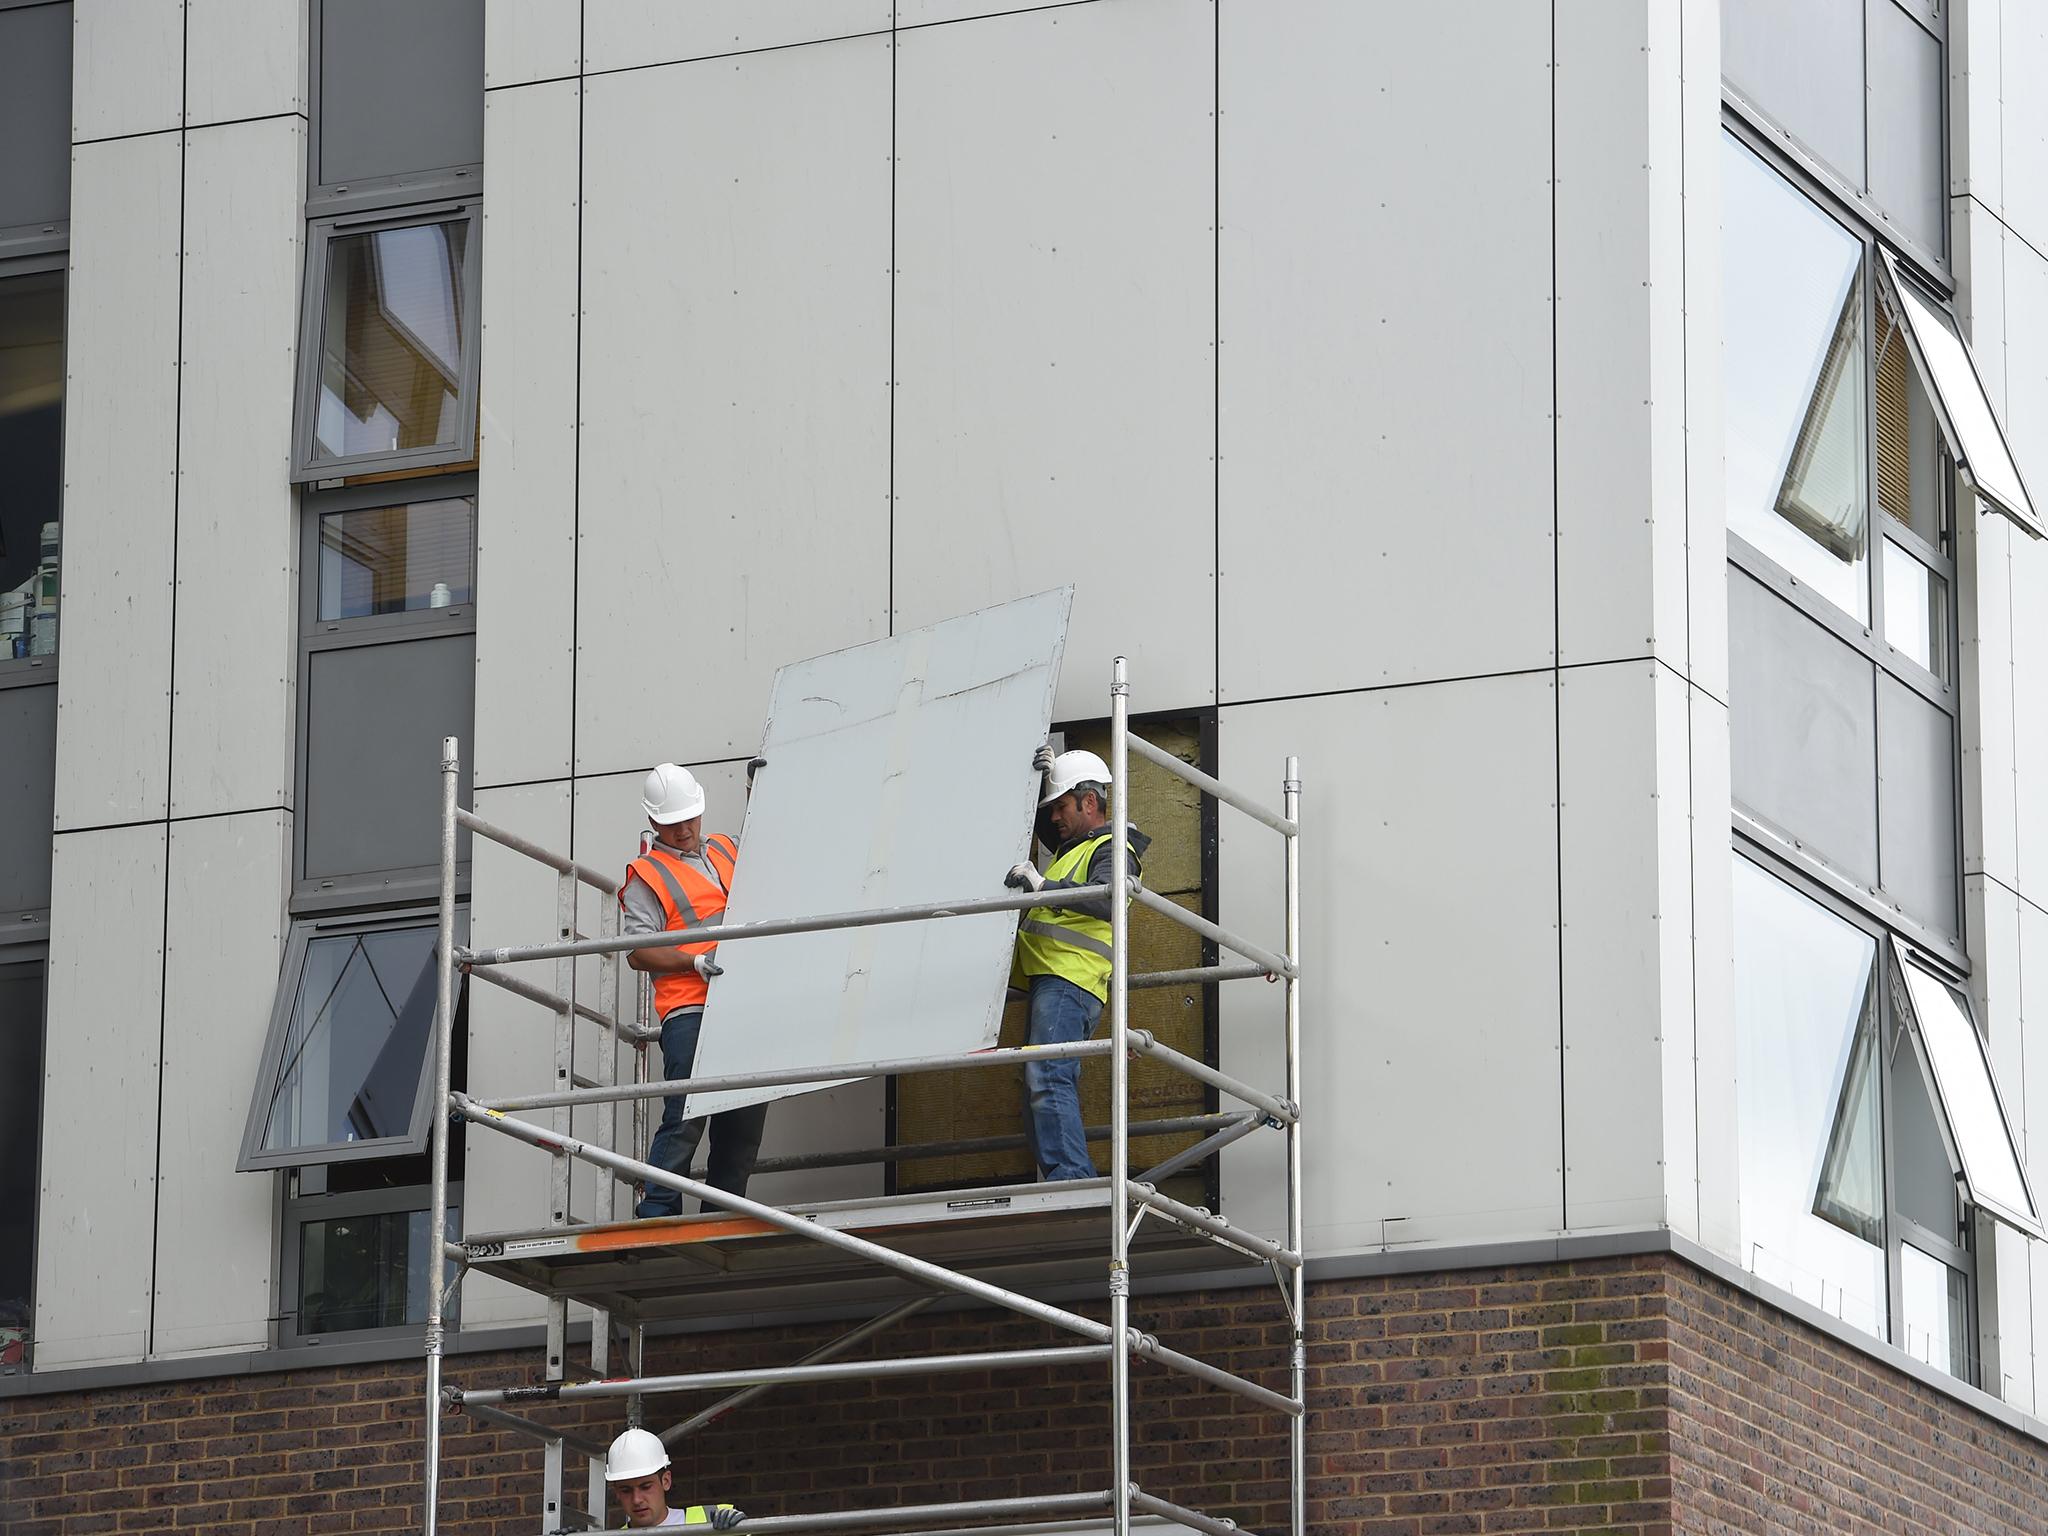 A portion of cladding being removed from a housing block in north London